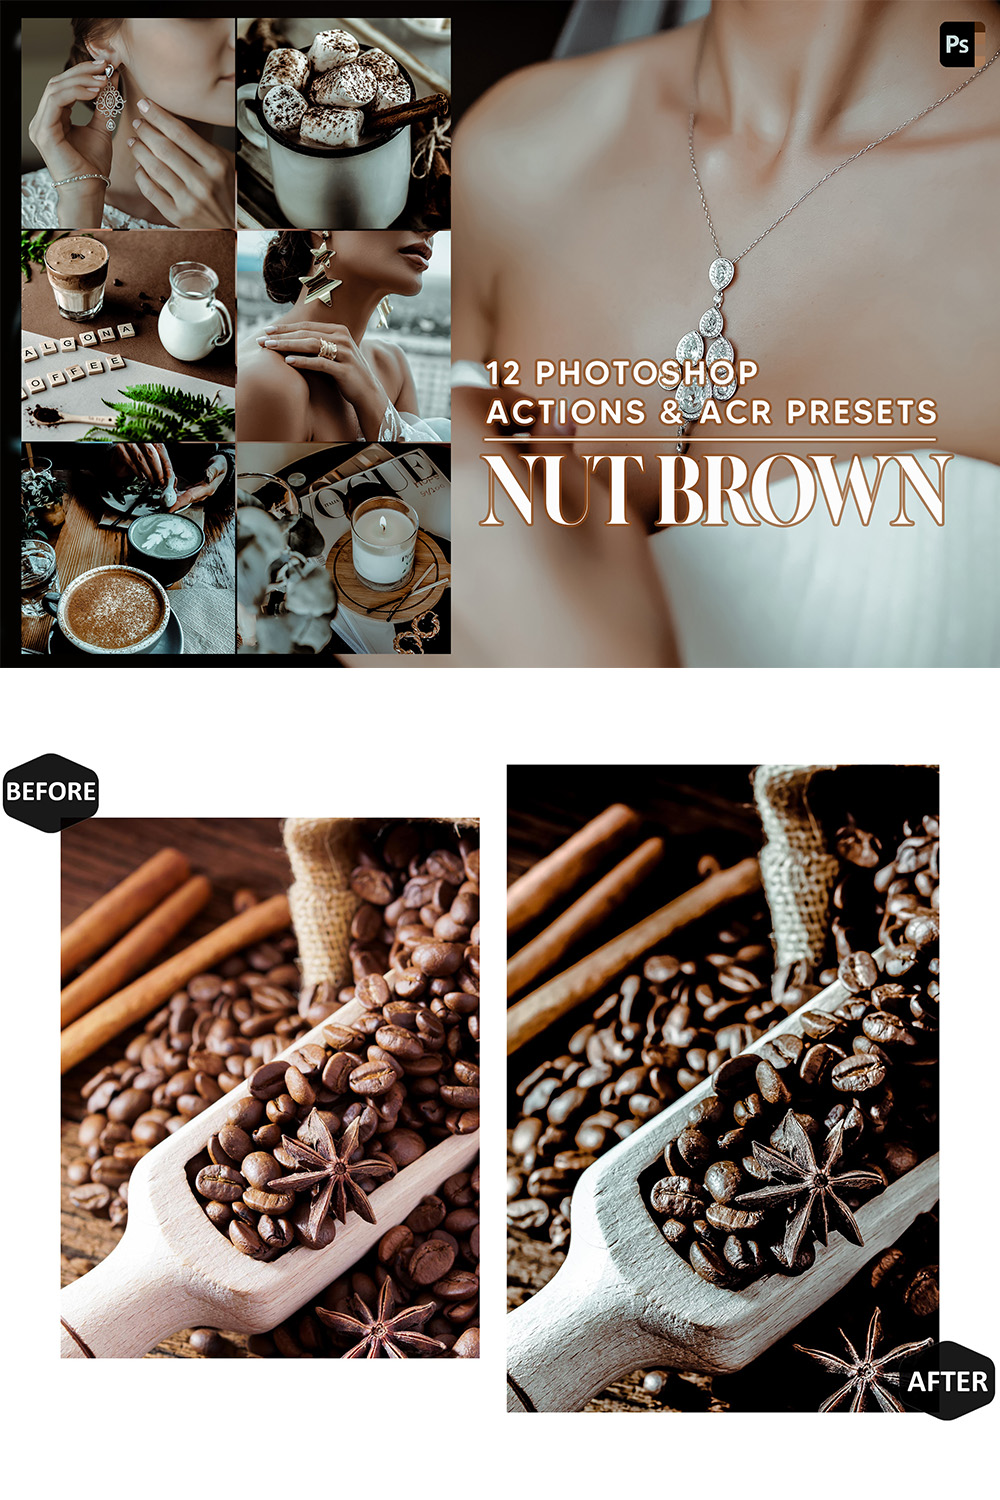 12 Photoshop Actions, Nut Brown Ps Action, Close Up ACR Preset, Moody Brown Ps Filter, Portrait And Lifestyle Theme For Instagram, Blogger pinterest preview image.